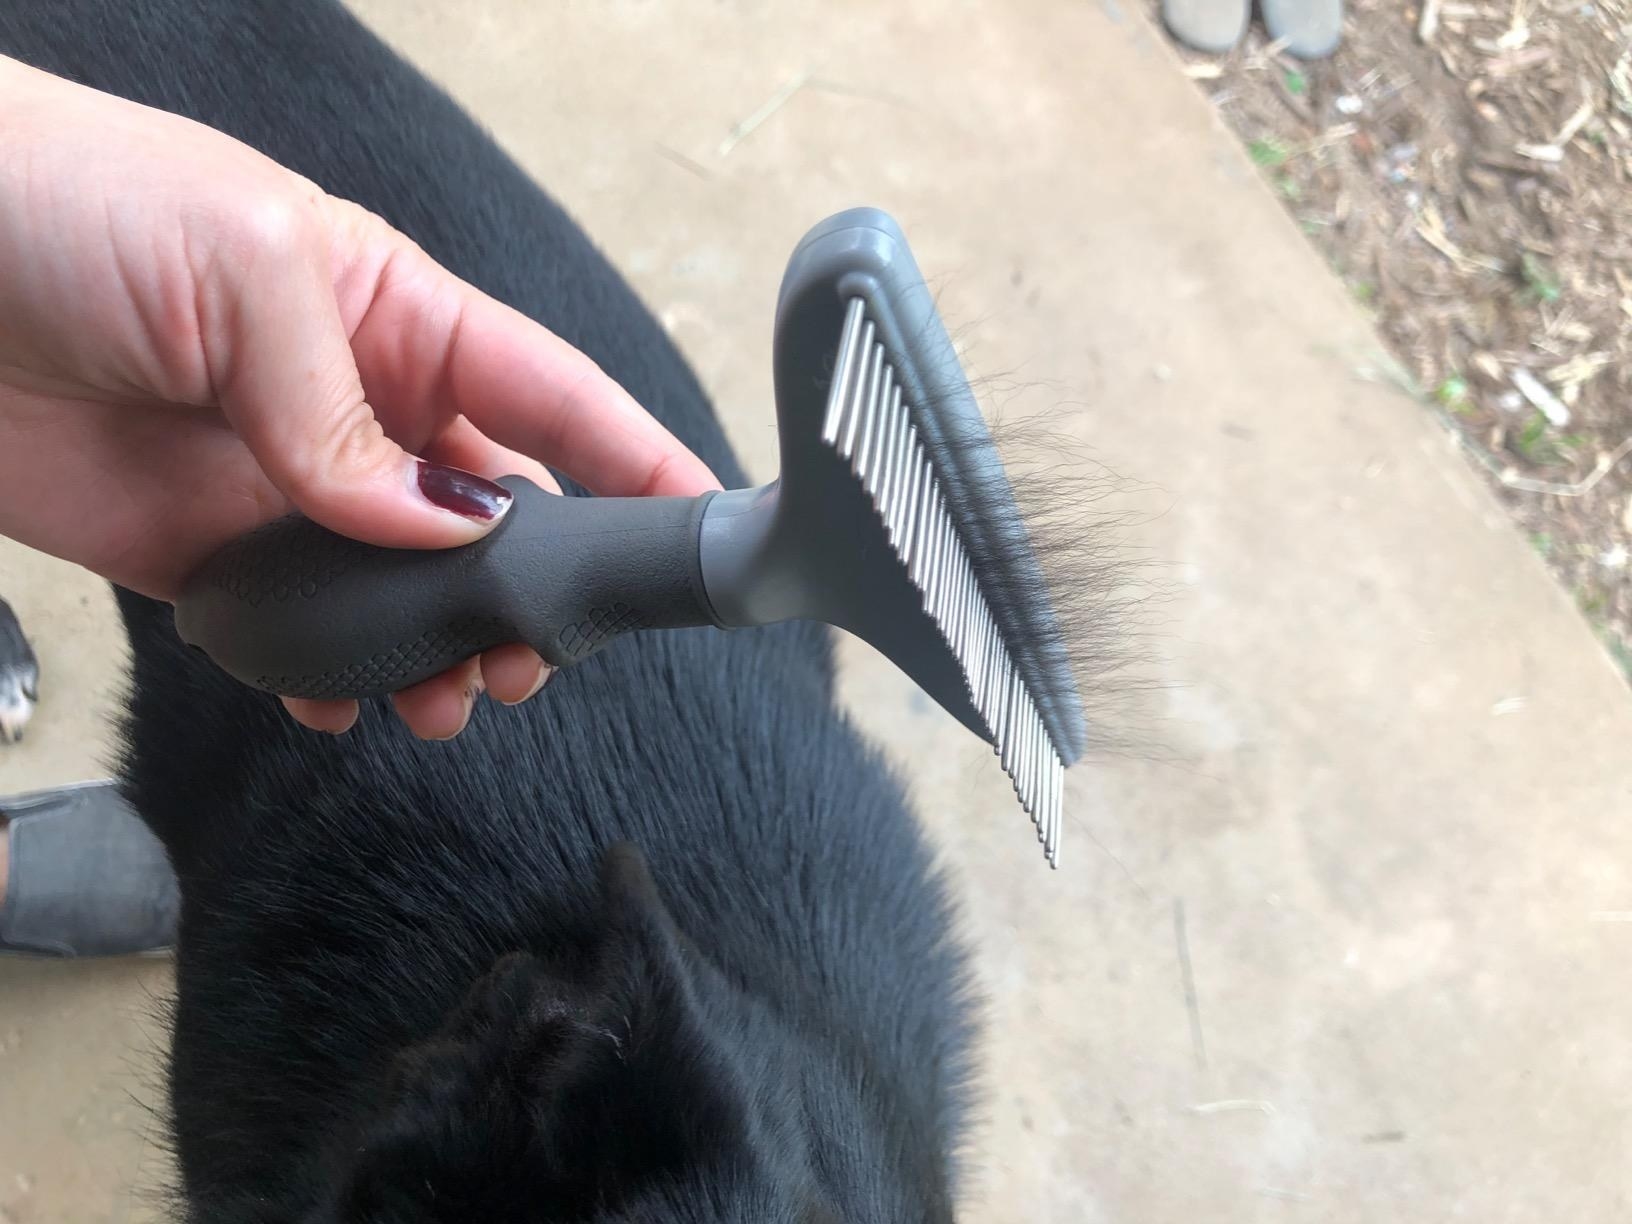 The rake with fur between tines after brushing the cat